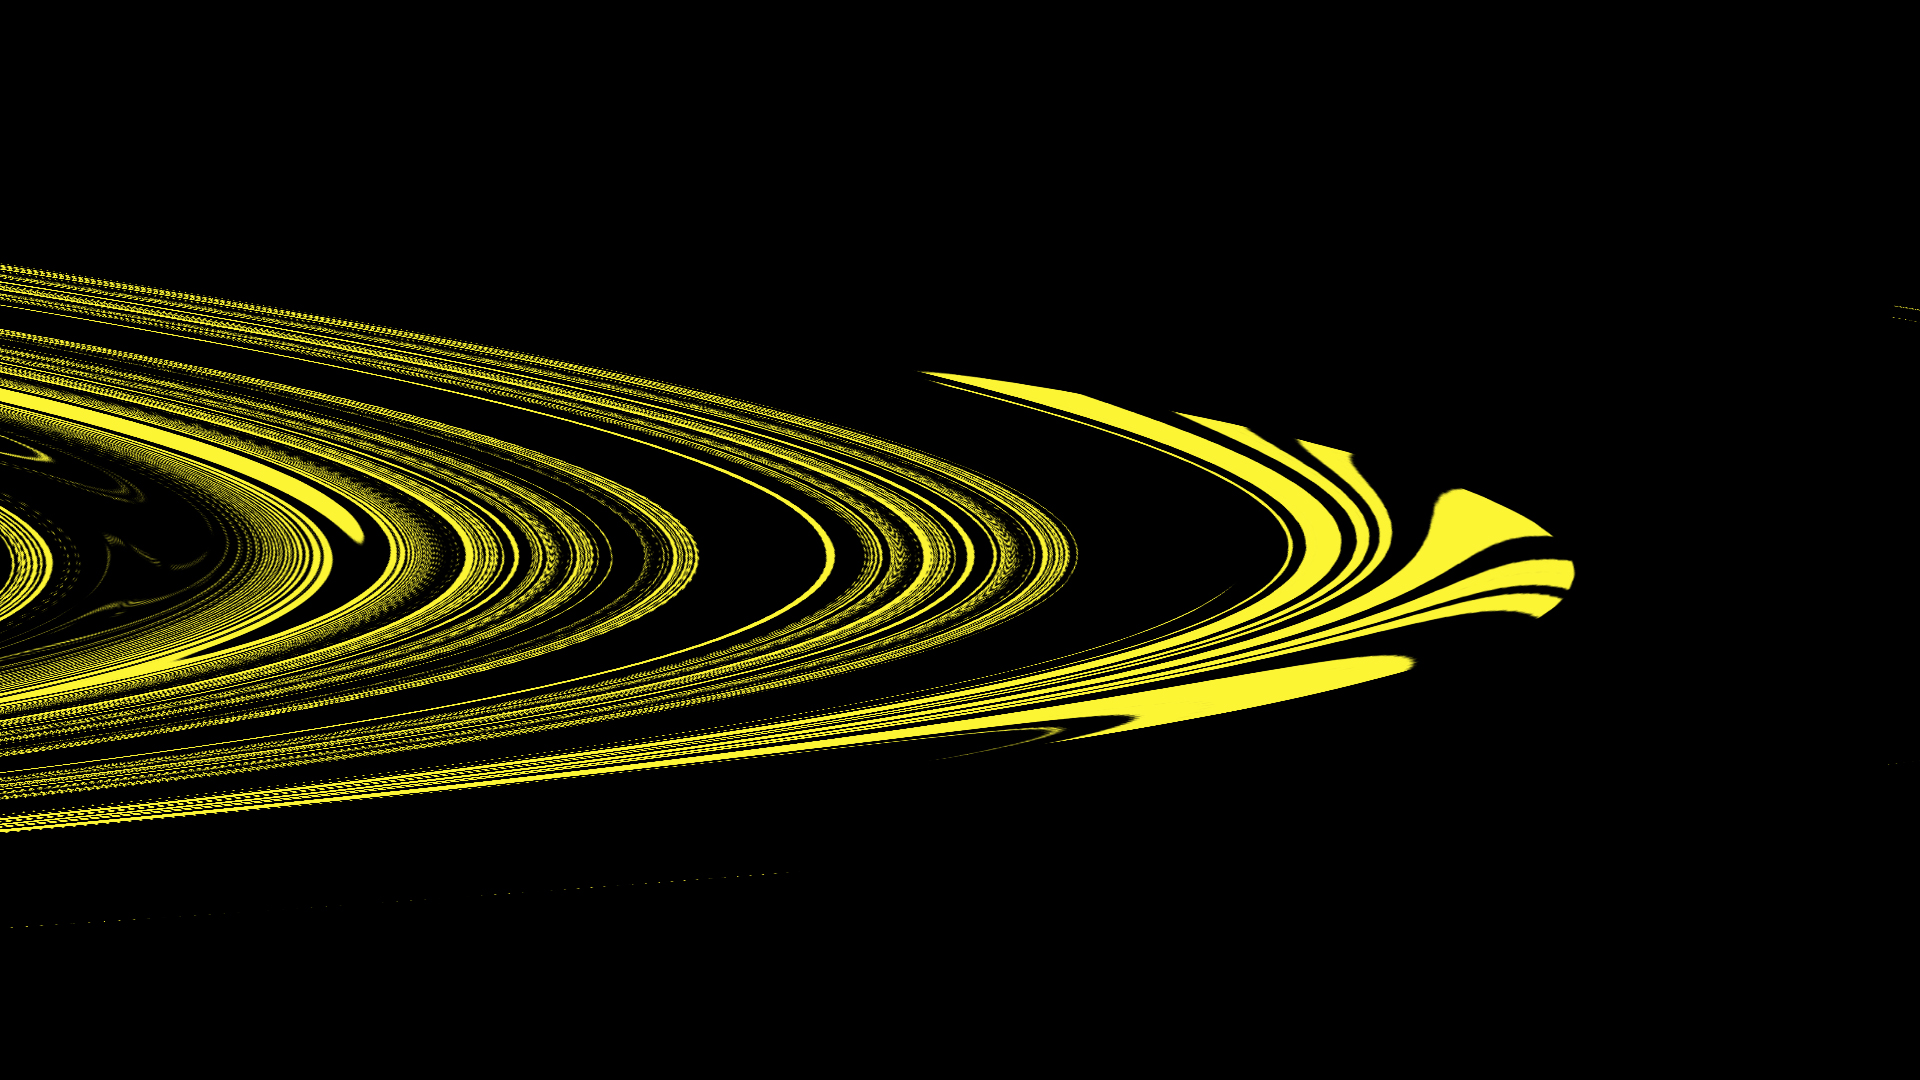 Abstract Artistic Curves Digital Art Yellow 1920x1080